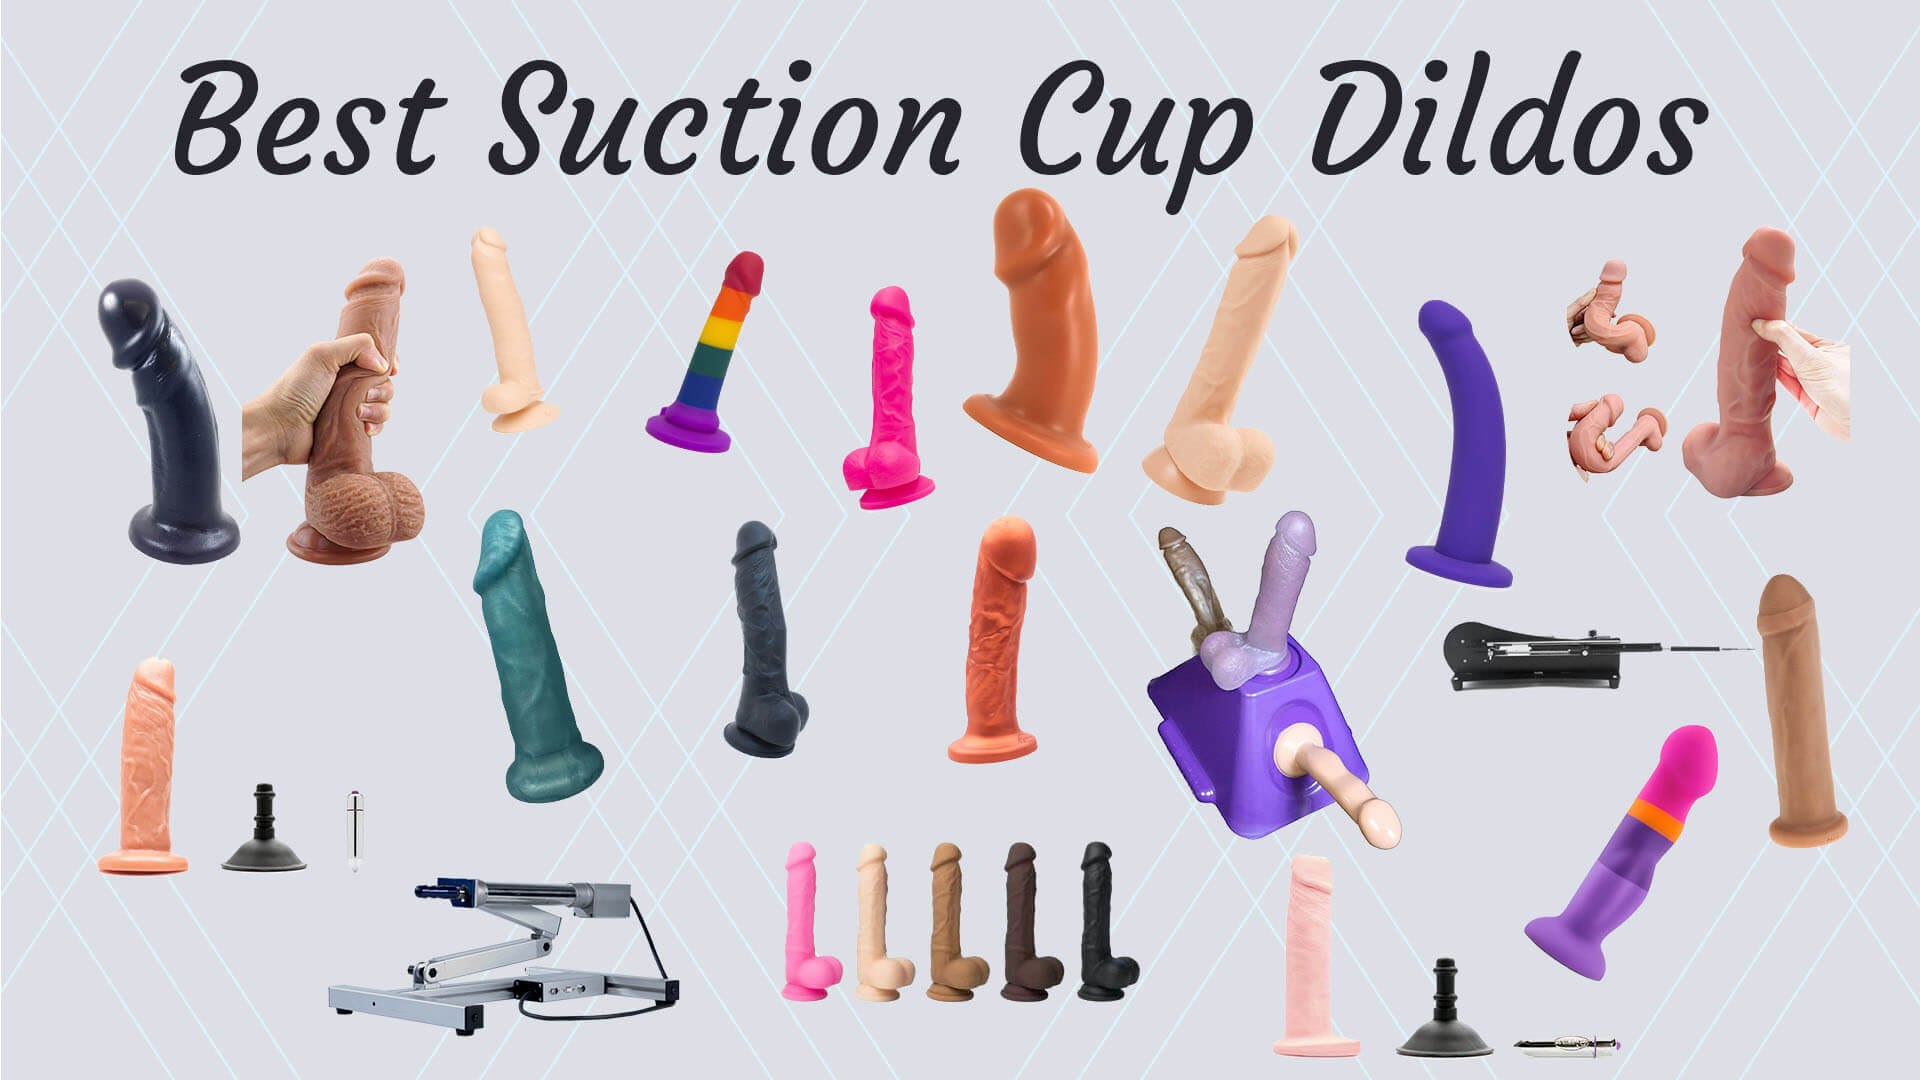 The 20 Best Suction Cup Dildo Toys - Shower Wall Dildos & More